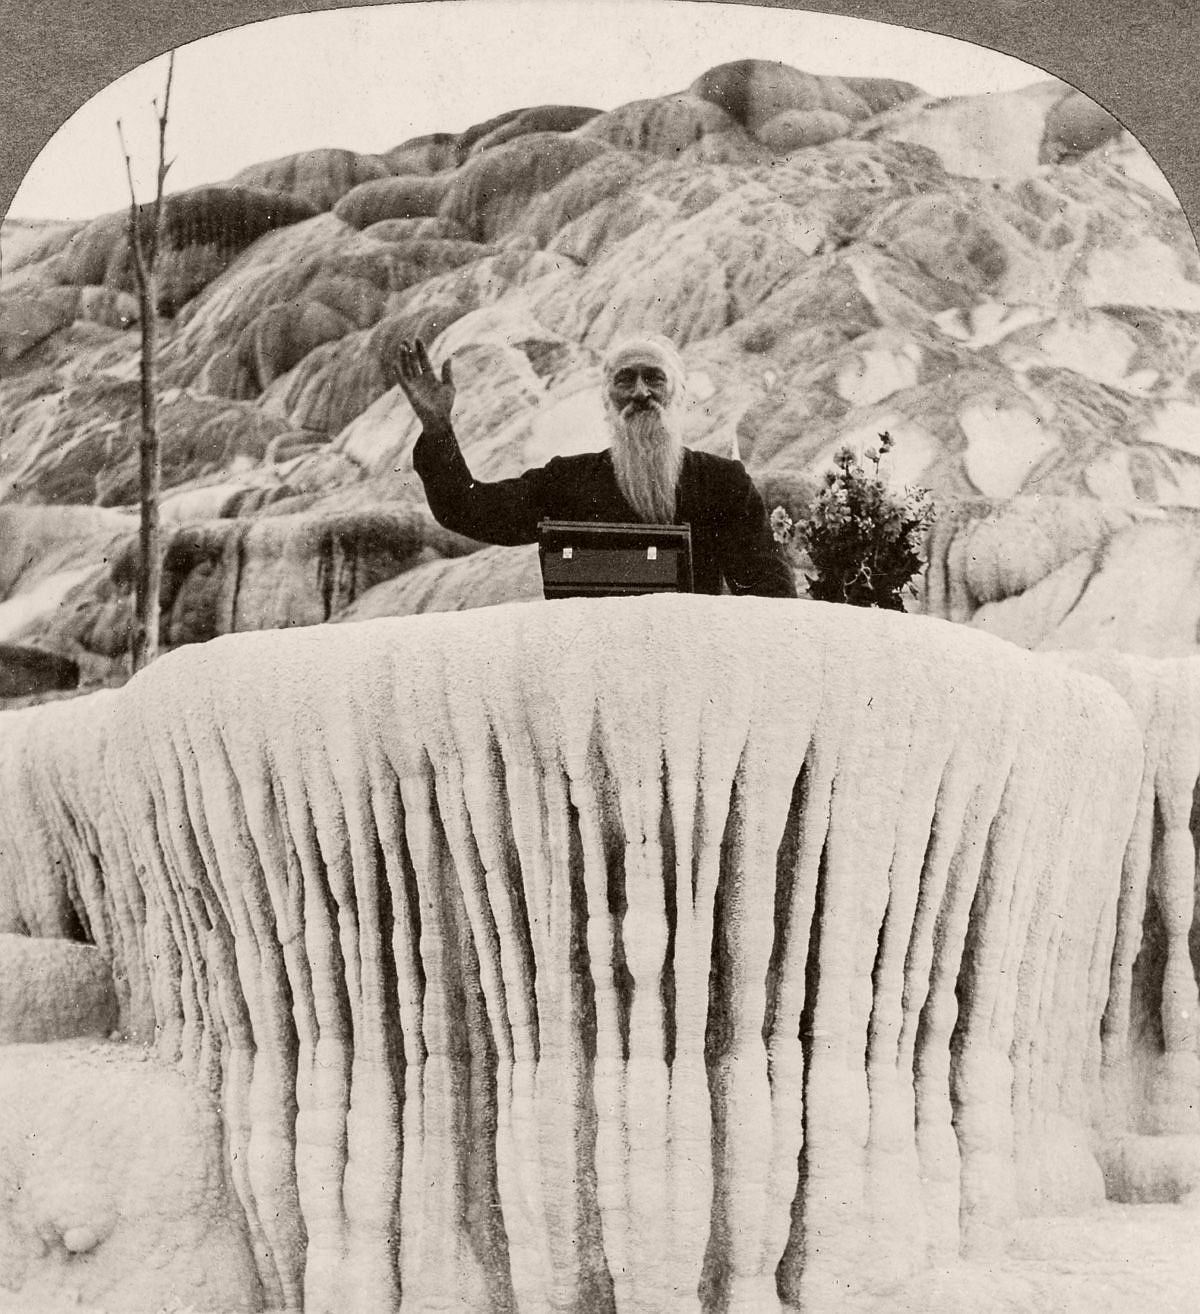 A man stands behind the "Pulpit Terrace" formation at the Mammoth Hot Springs in Yellowstone, 1904. (Library of Congress)